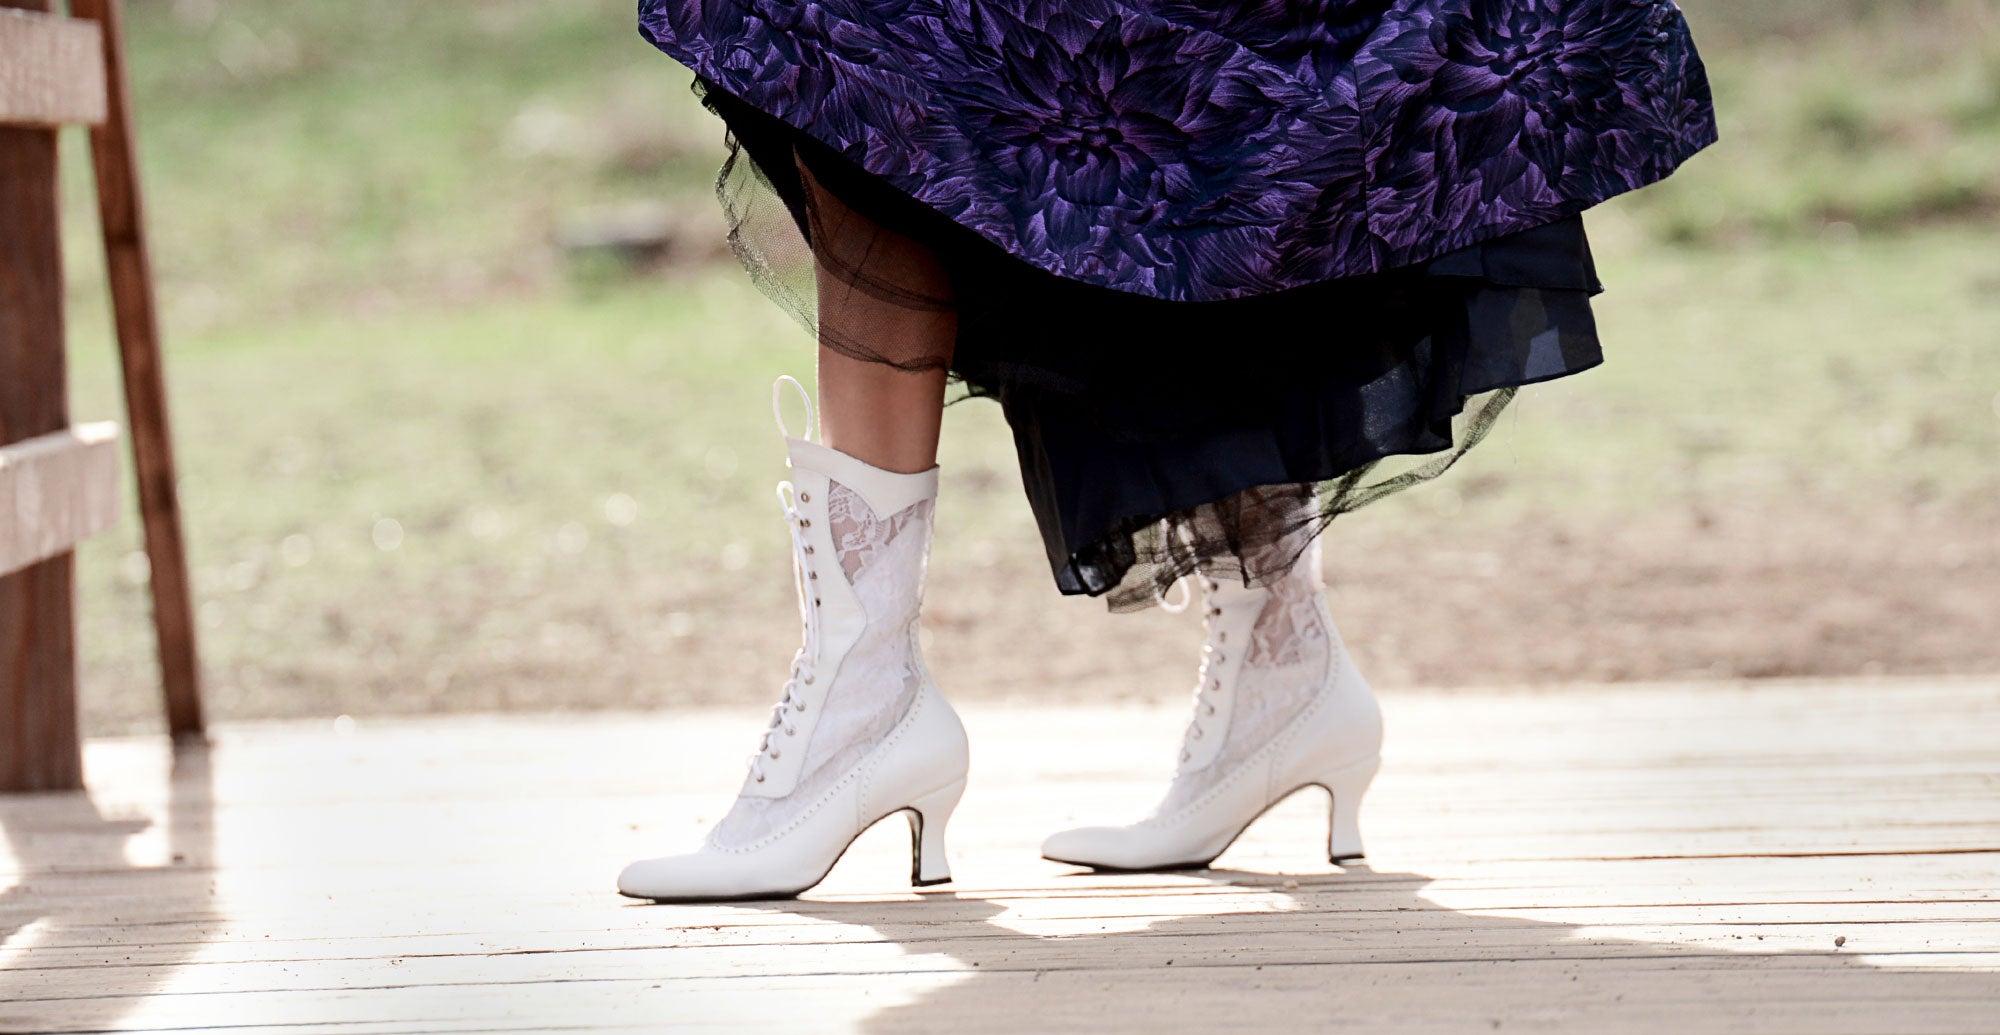 A woman wearing a purple dress and white boots.